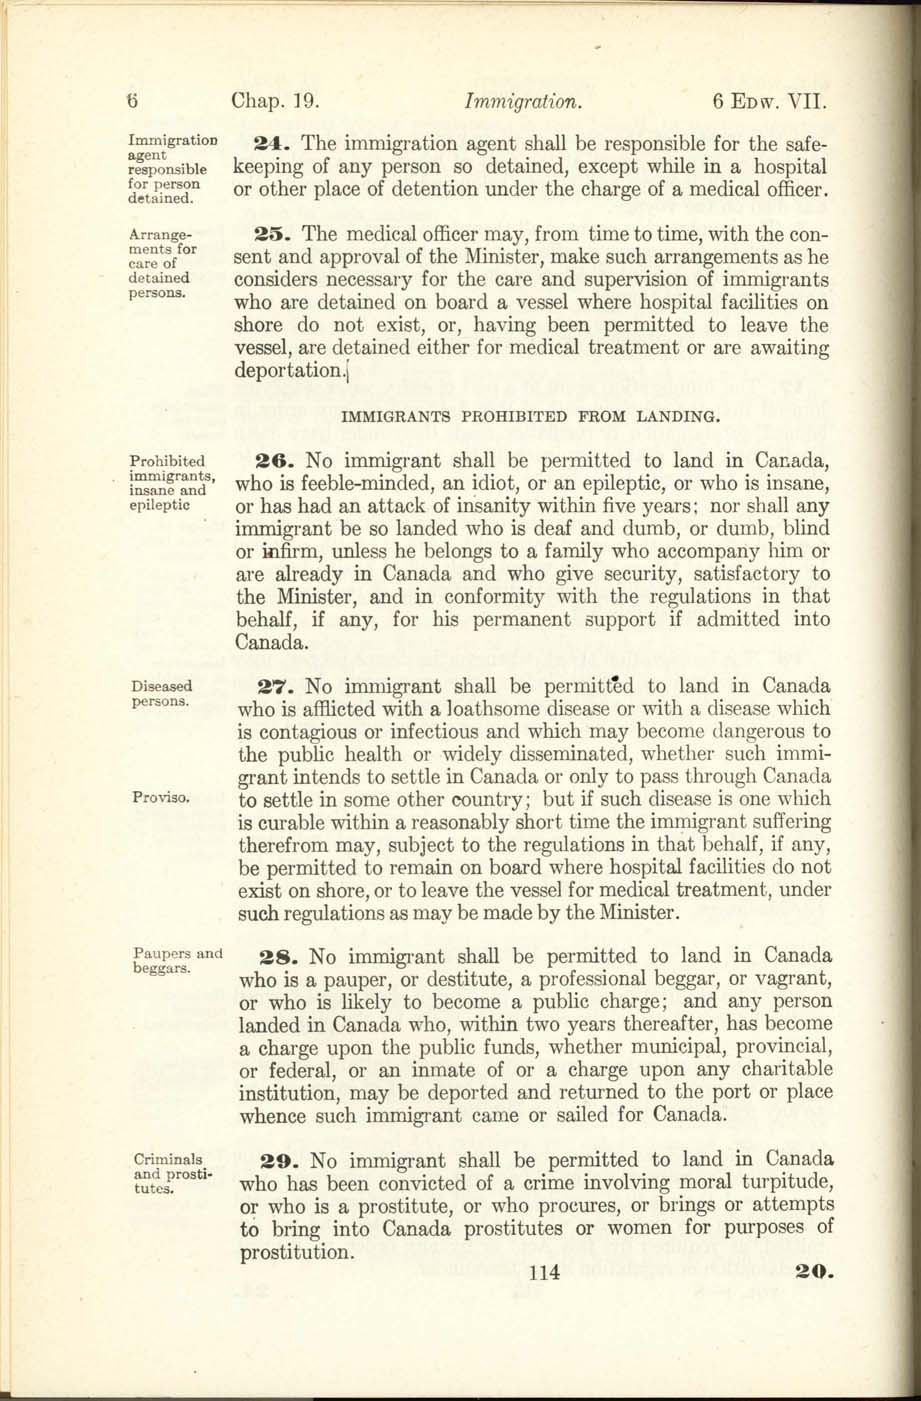 Chap. 19 Page 114 Immigration Act, 1906